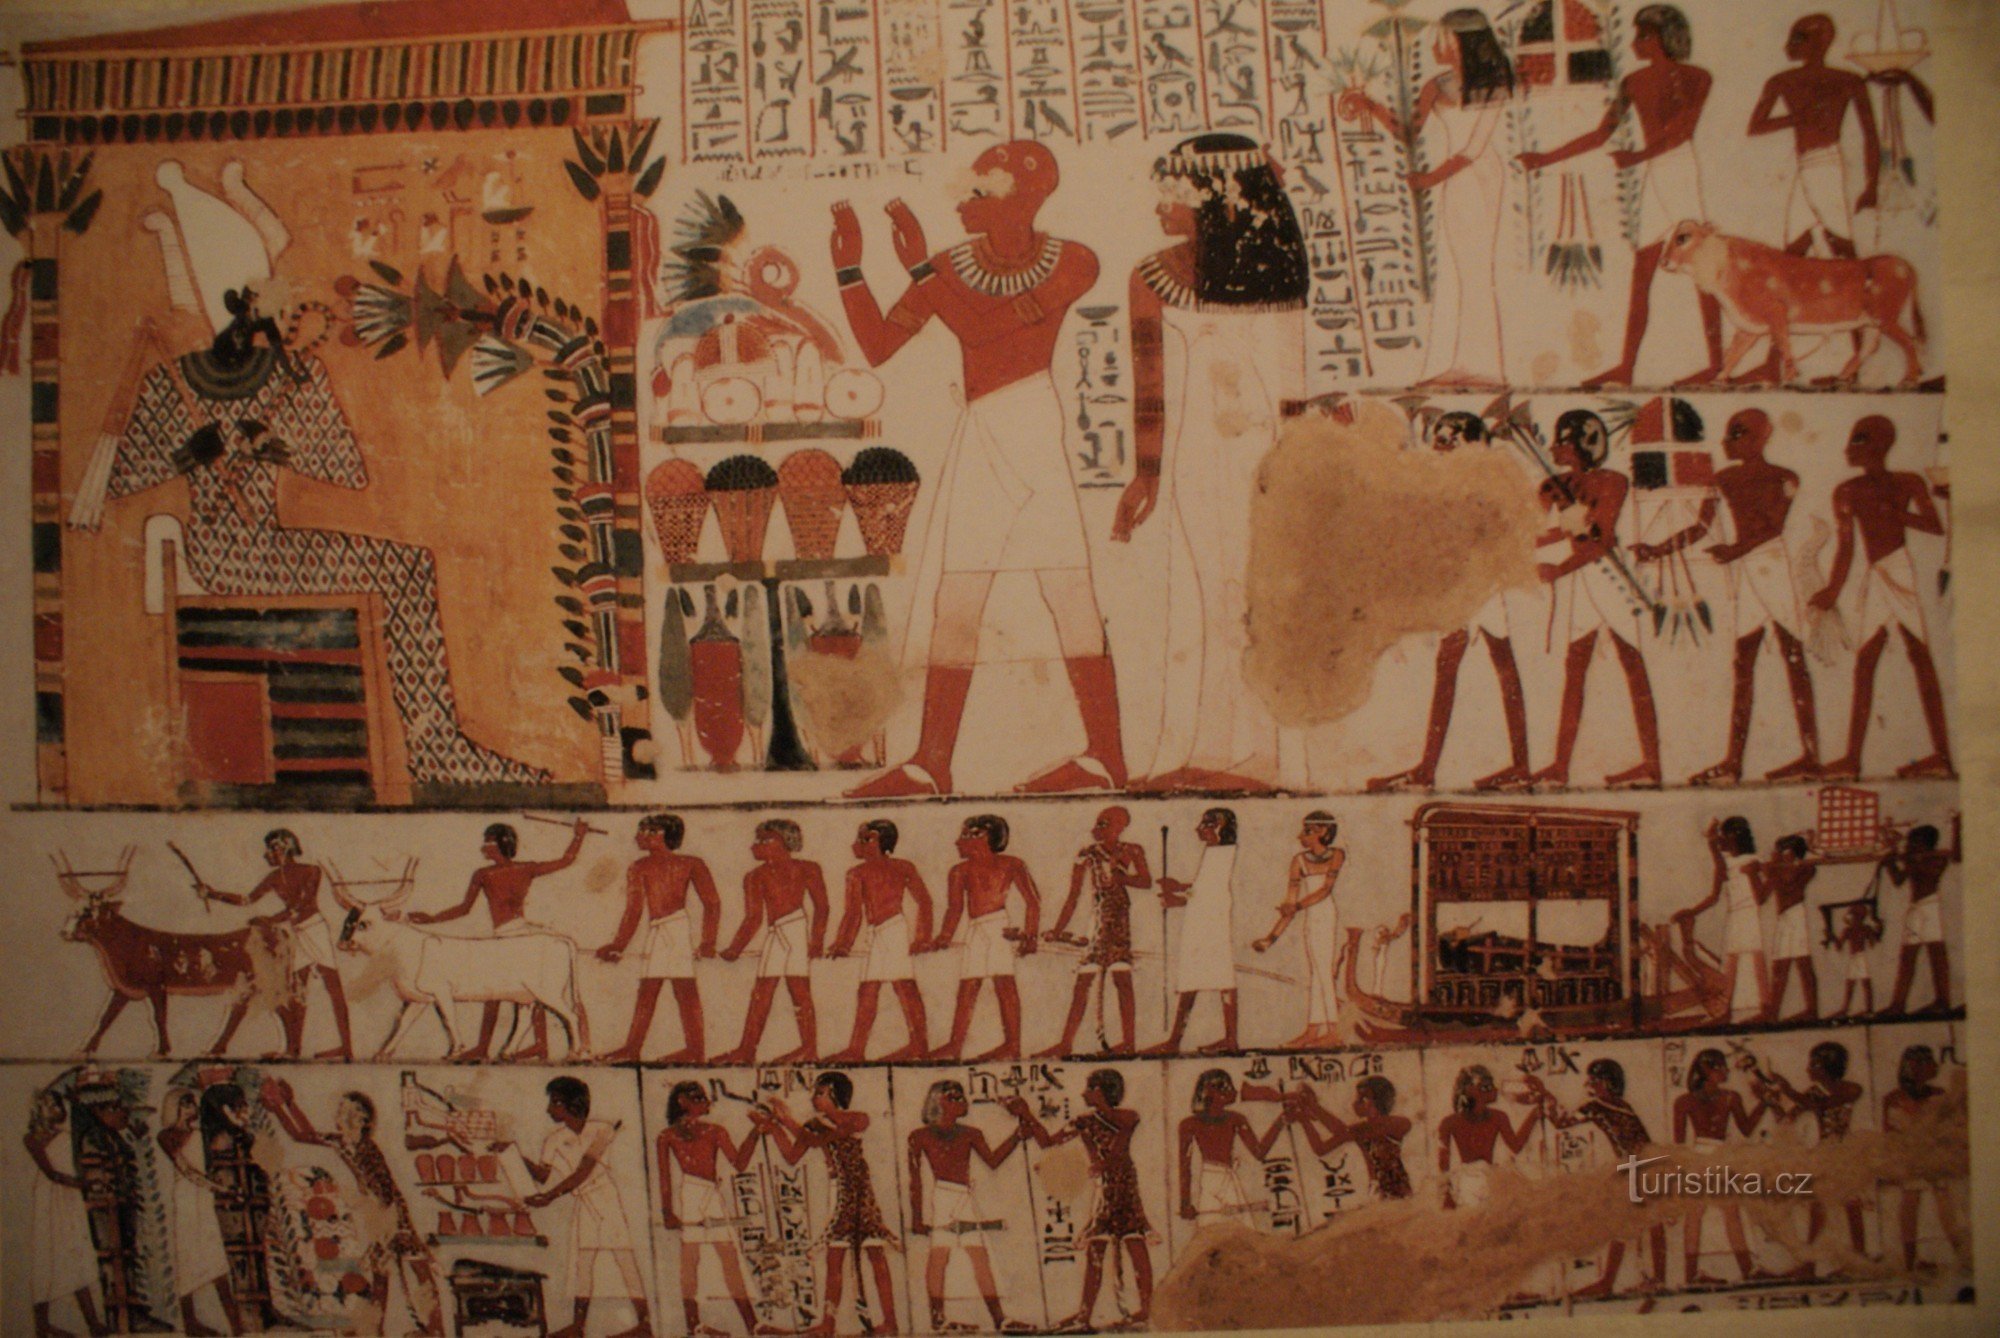 You don't have to go all the way to Egypt for Tutankhamun or his tomb and treasures (Brno 2009)